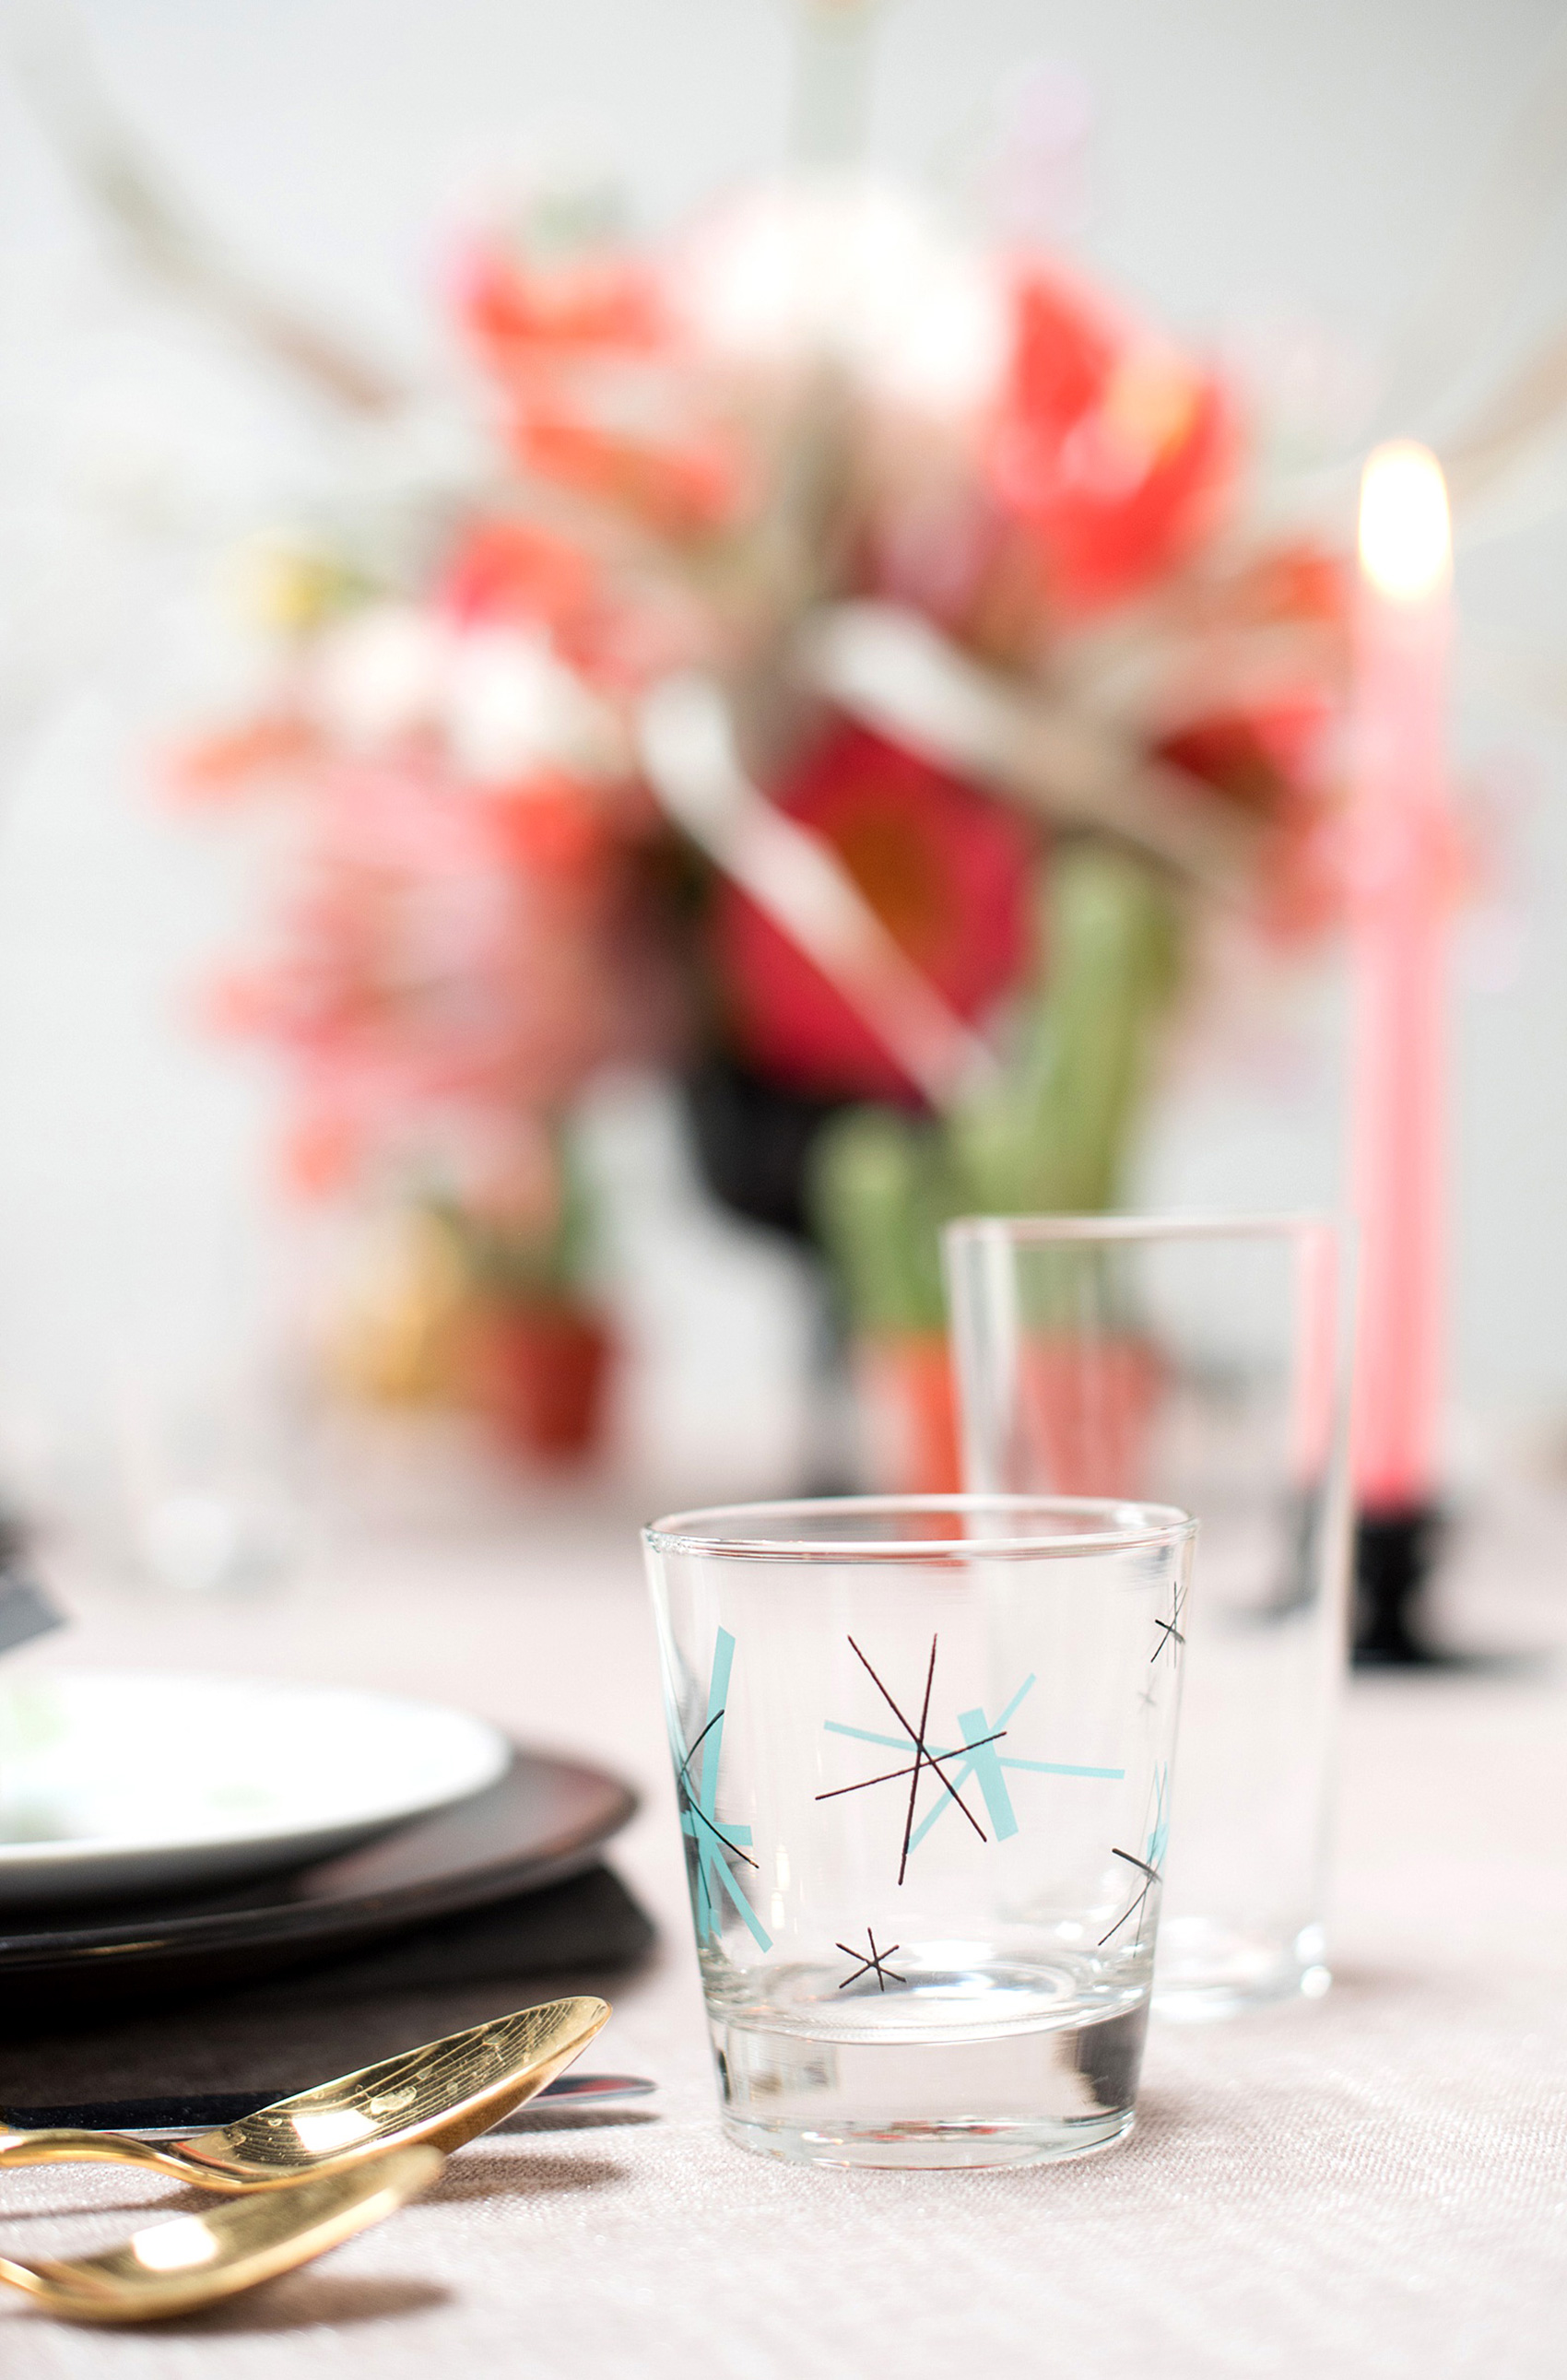 Palm Springs wedding photos for inspiration and ideas for a colorful Mid-Century modern look. Photos by Mikkel Paige Photography, NYC photographer. Planning by Color Pop Events for a shoot with Love Inc. Mag. #PalmSpringsInspiration #PalmSpringsWedding #Midcenturymodern #tropicalwedding #glassware